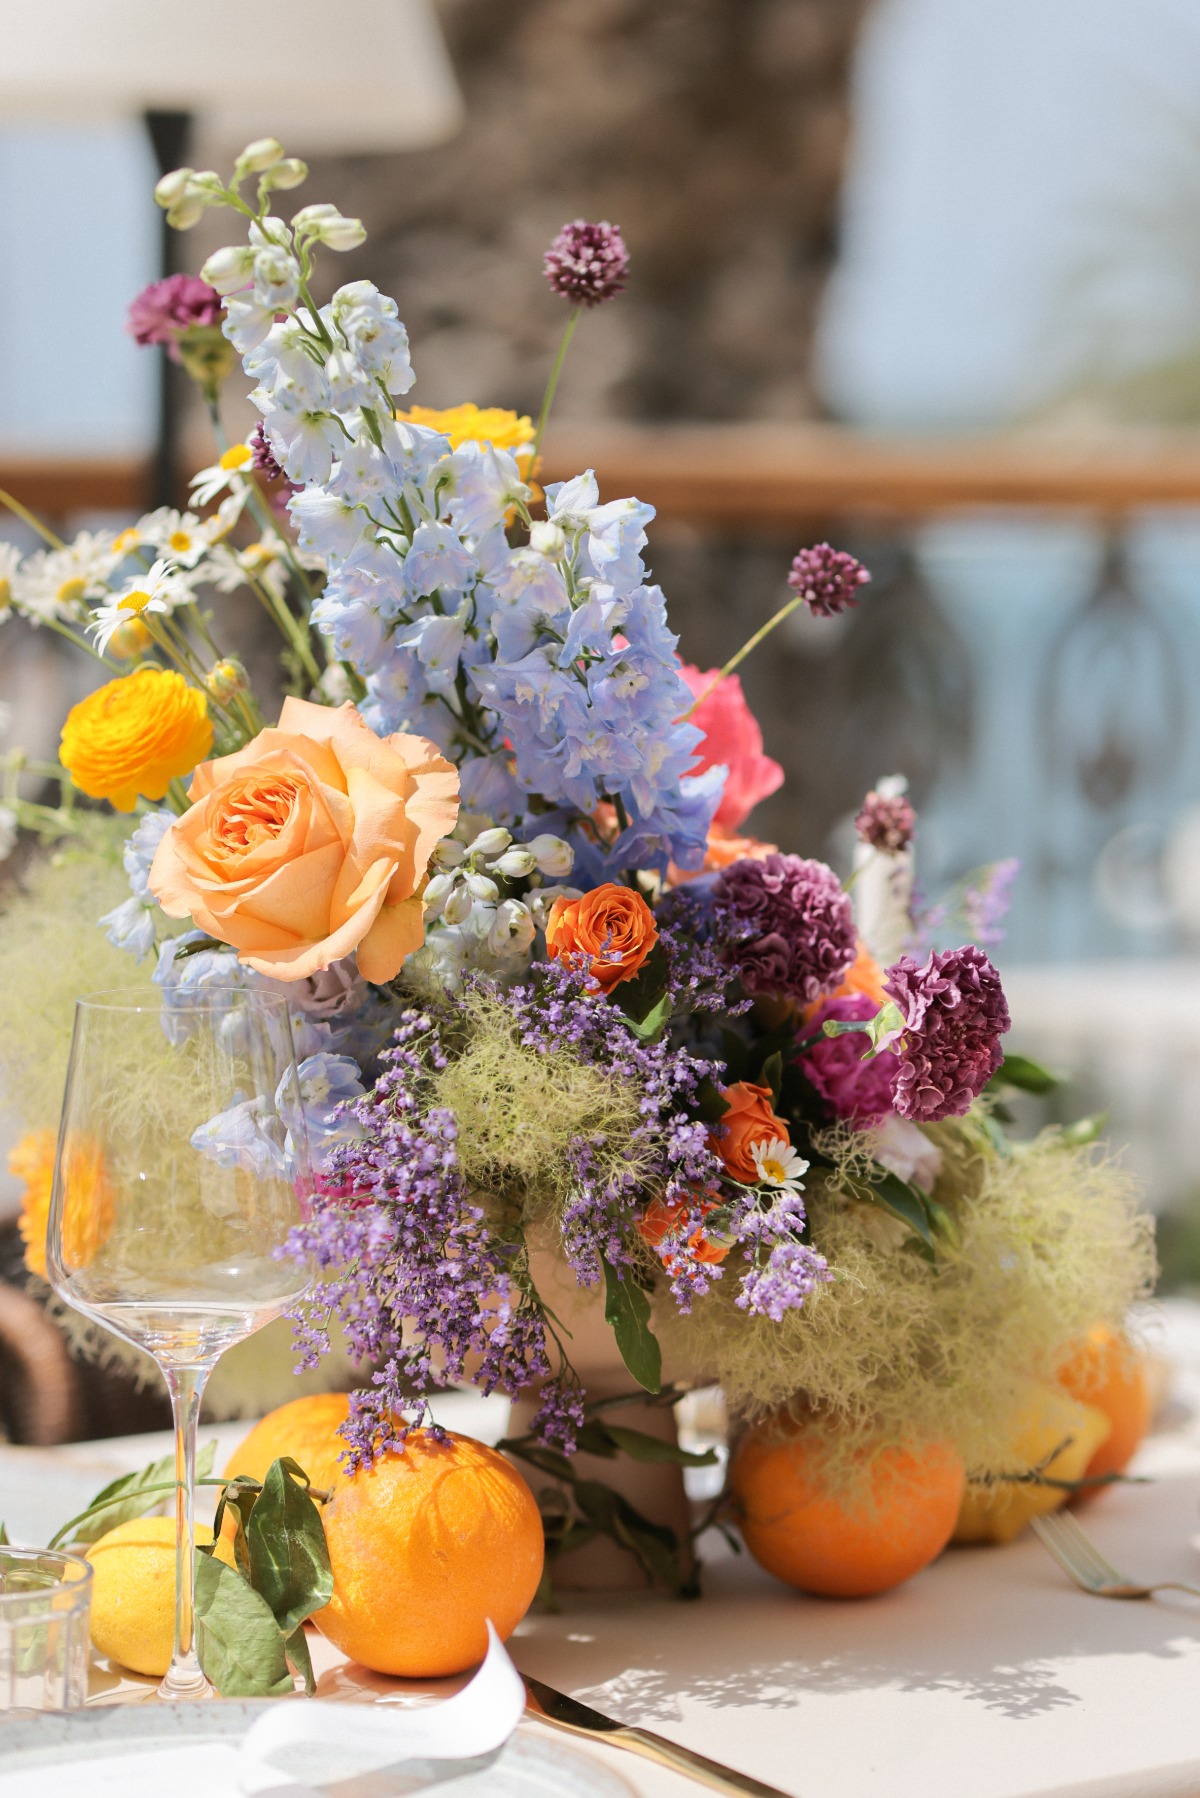 Close up of colorful floral arrangement with oranges and lemon underneath